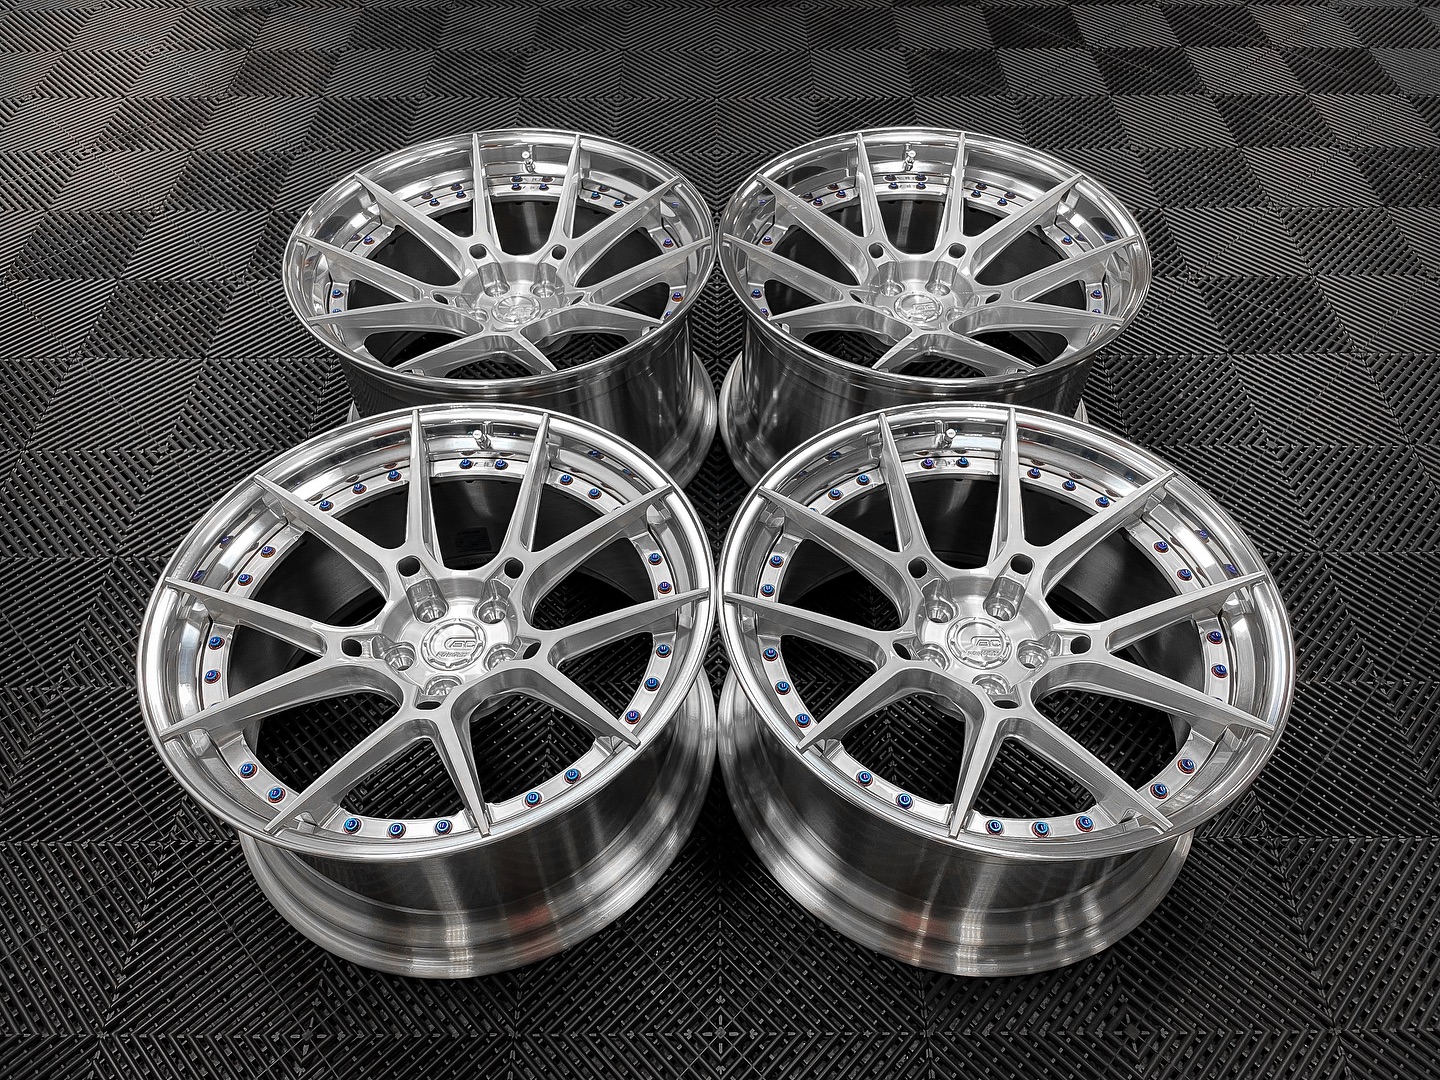 S650 Mustang Authorized Dealer BC Forged Wheels: Monoblock And Modular Series Wheels For Mustang S650 420524168_18396380569064104_4452618714851752982_n